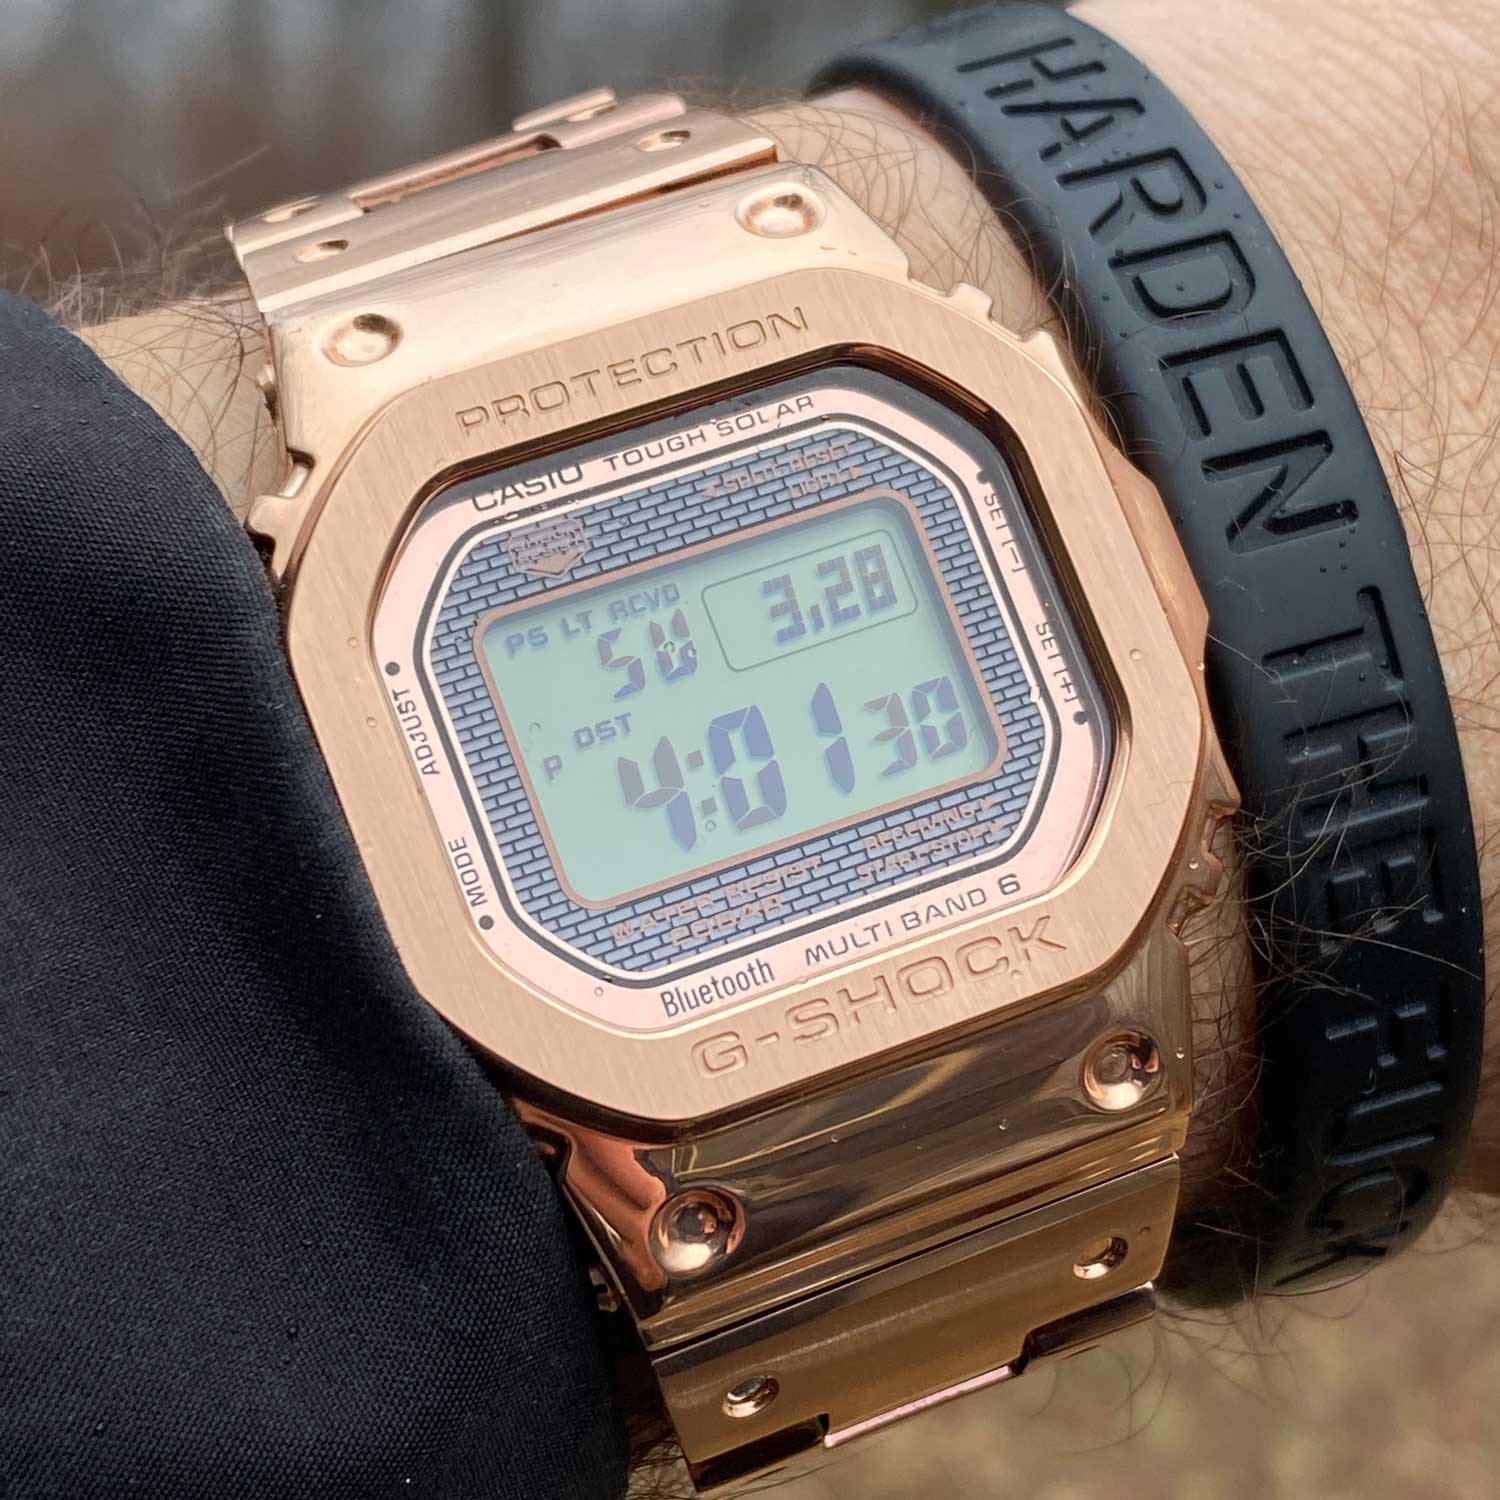 The GMW-B5000GD-4 is just the right watch for those looking for a positive display in a gold-tone full metal square. (©Revolution)